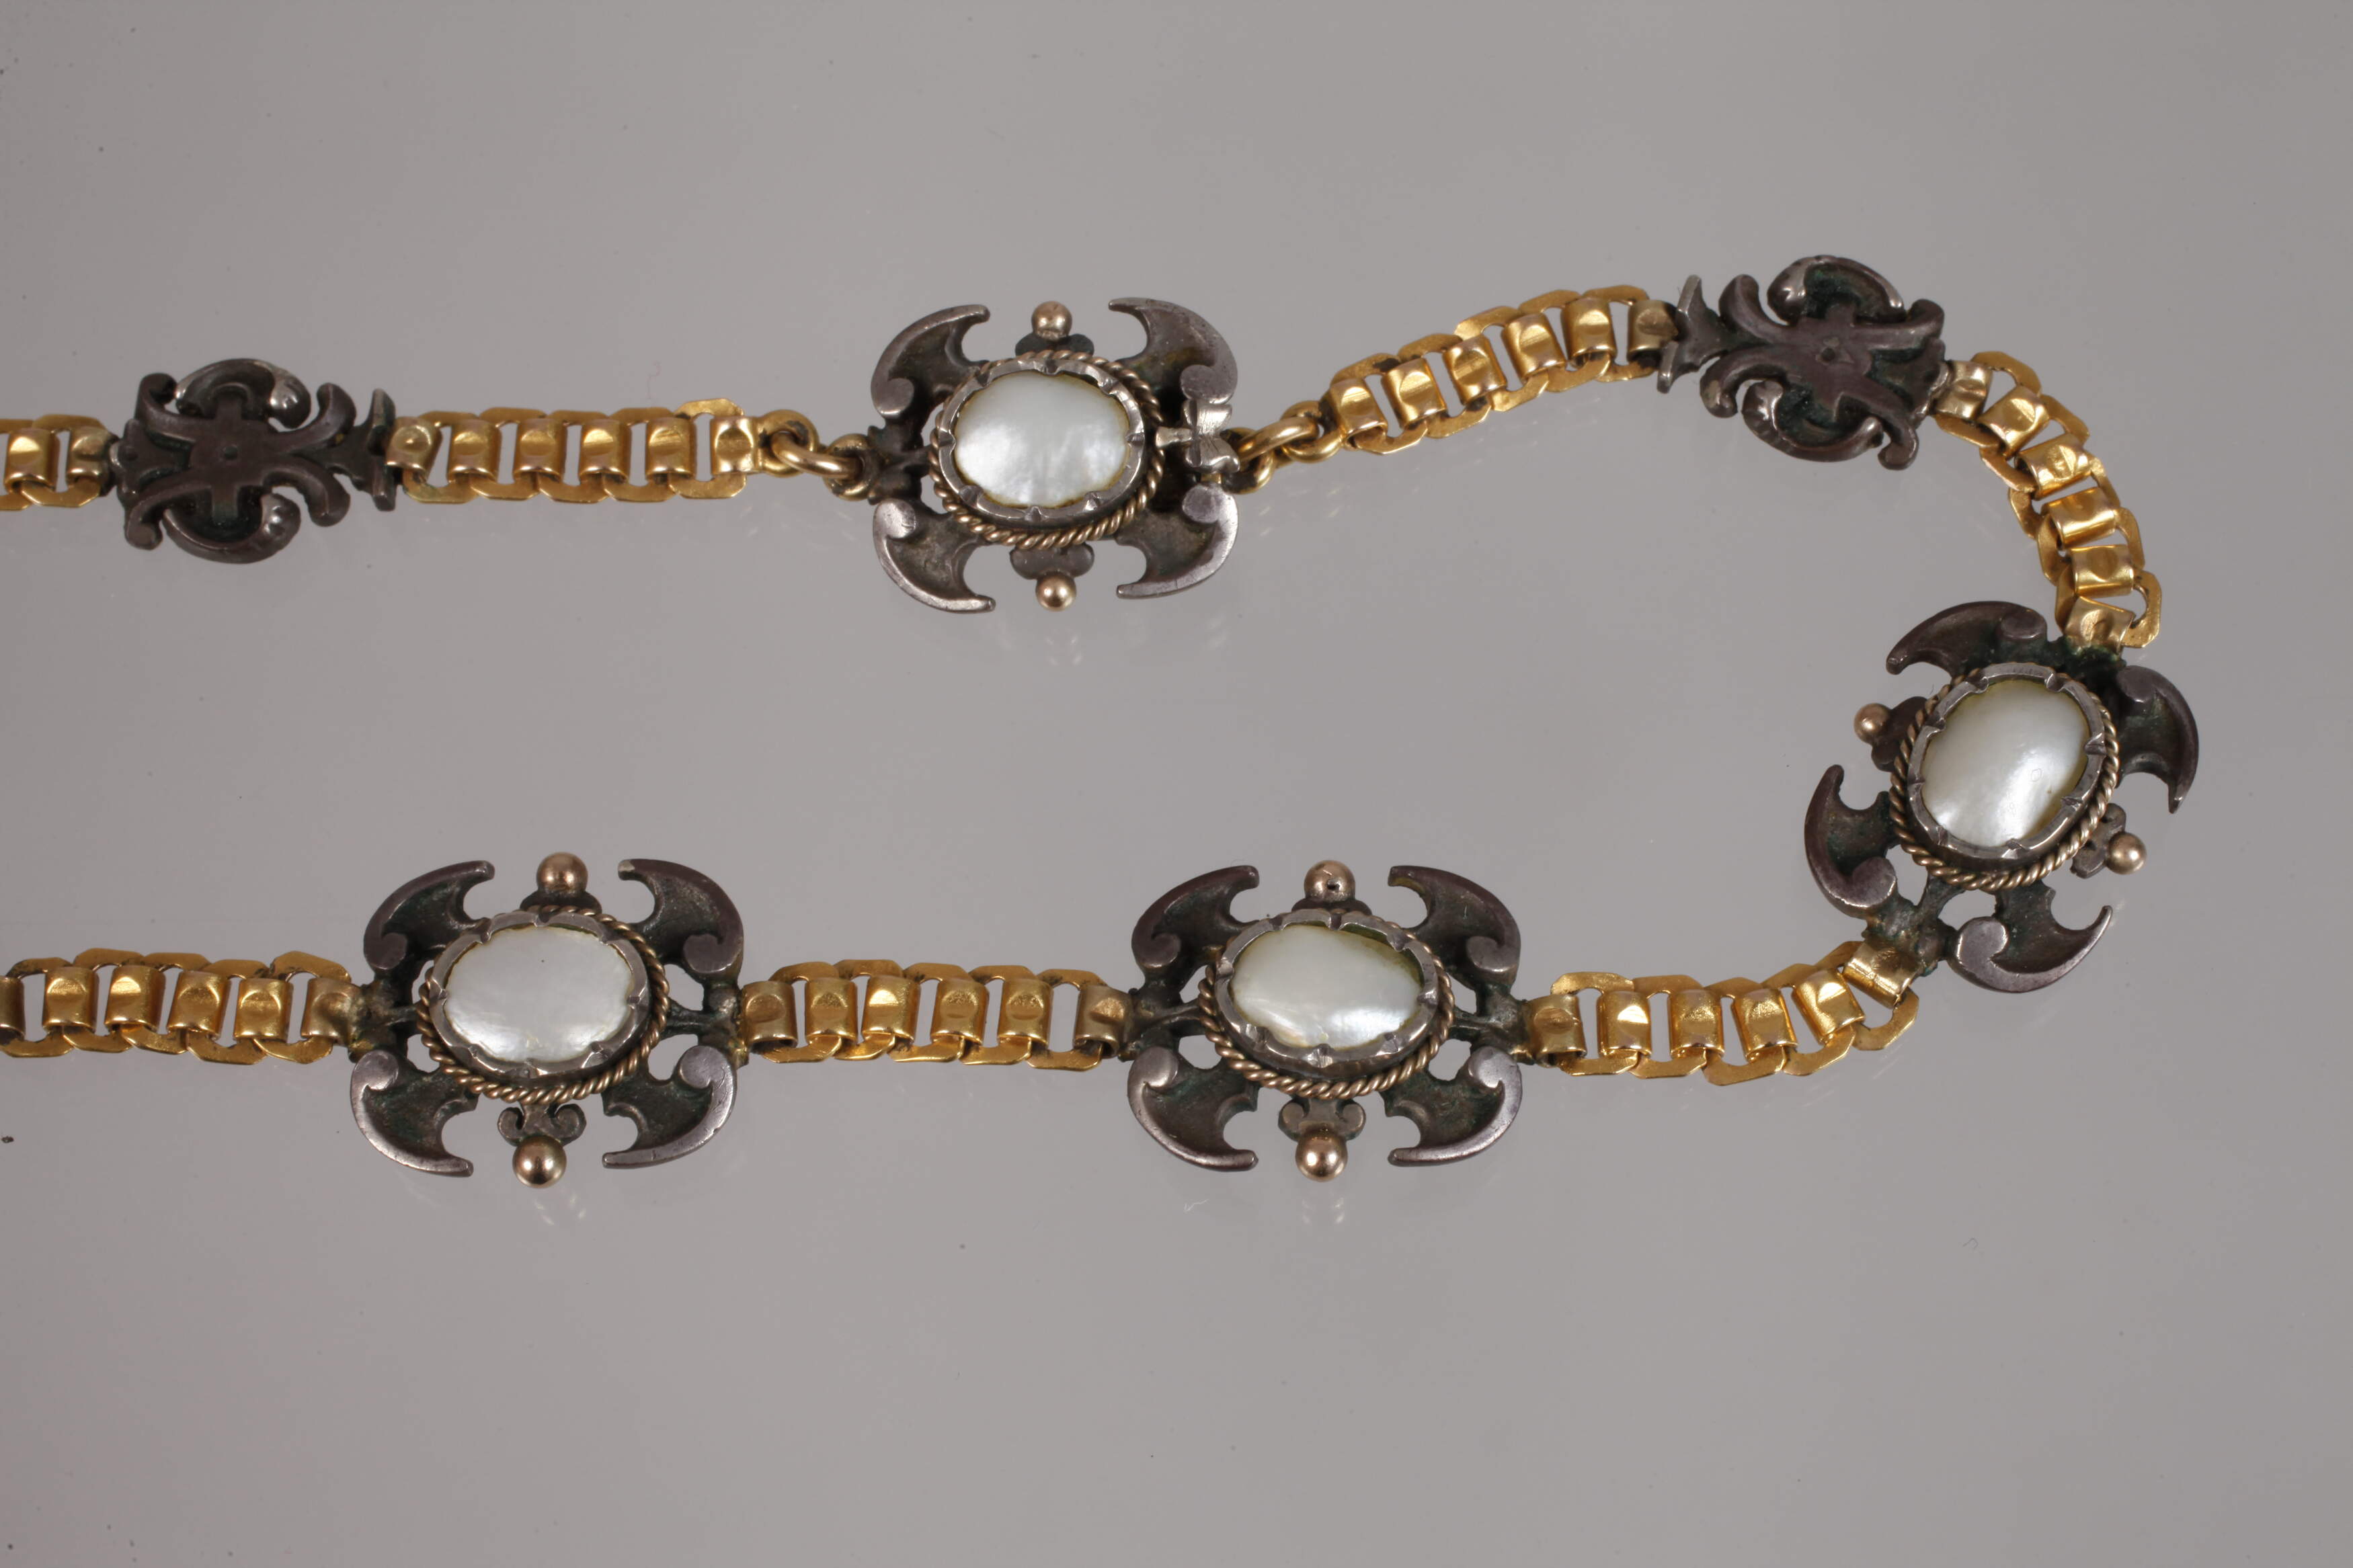 Historicist necklace - Image 3 of 3